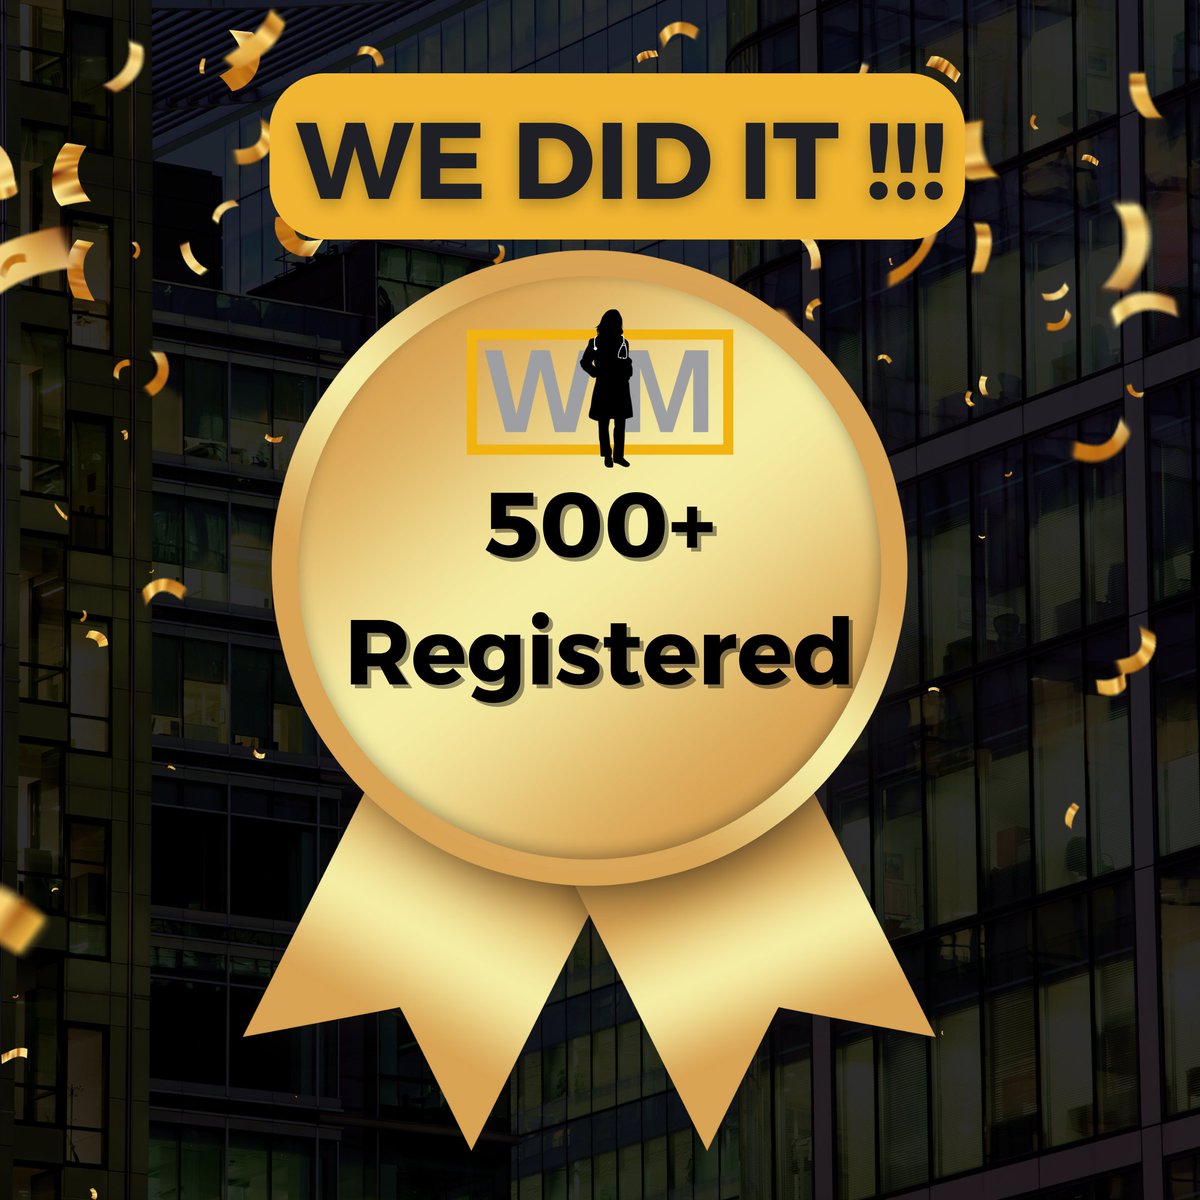 For the first time in WIMS history, we had over 500+ people registered! Thank you to all who made this possible, and hopefully next year we can top ourselves again. #WIMStrongerTogether #WomenInMedicine #Growth